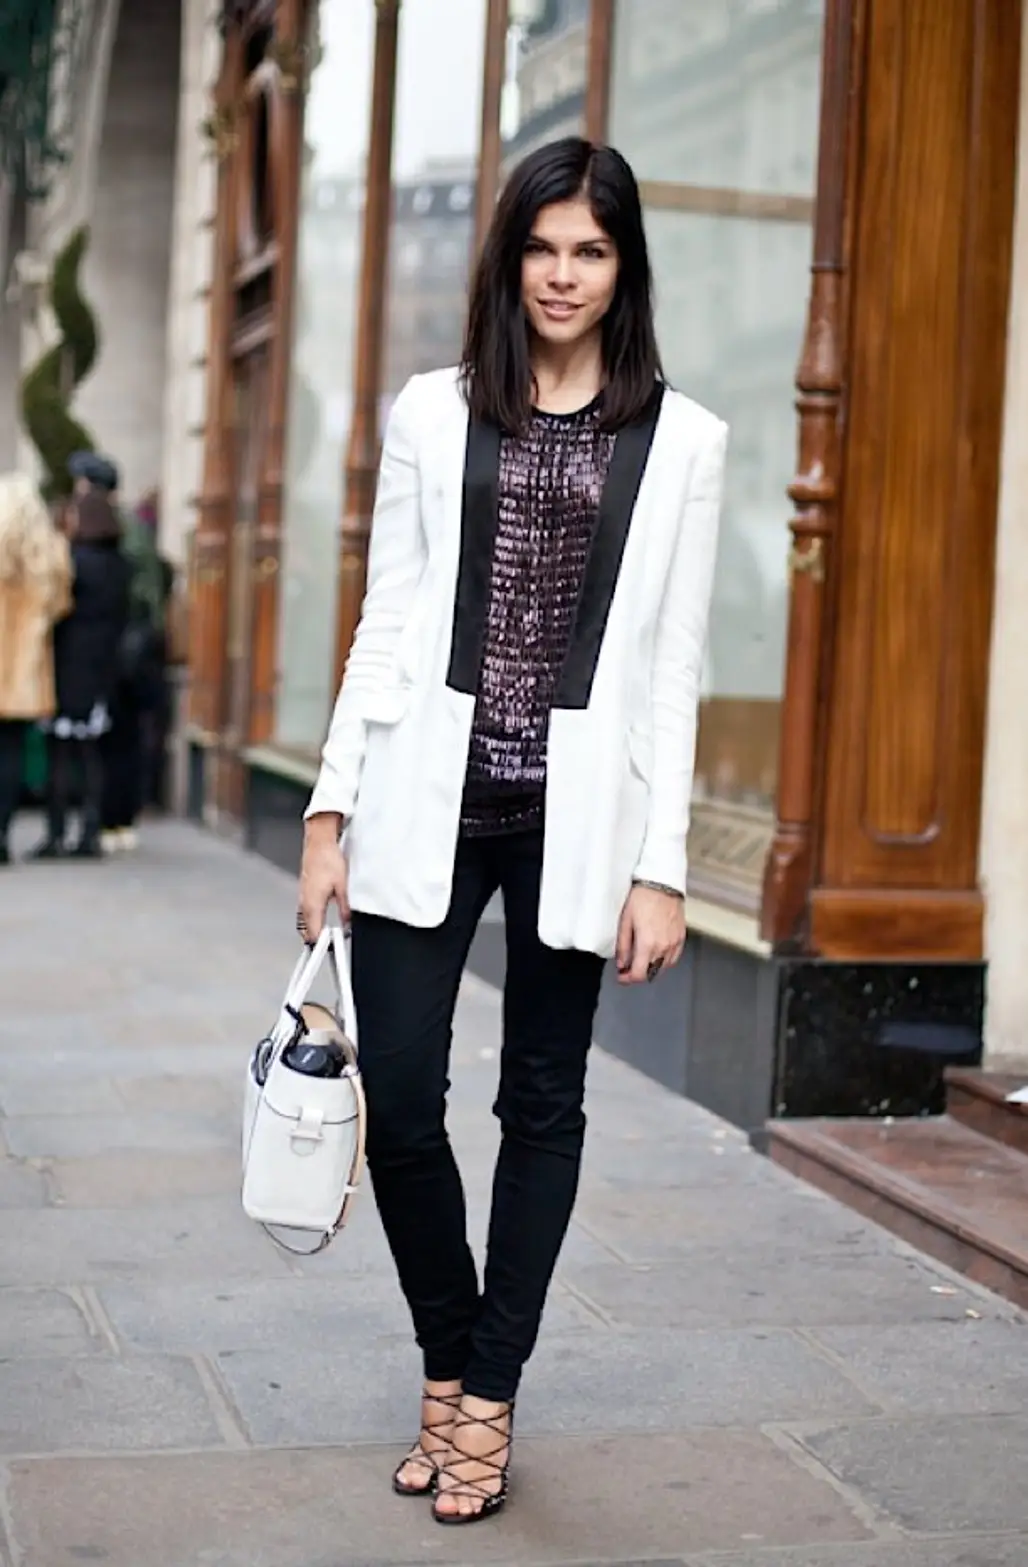 Smart, Chic and Trendy in a Tuxedo